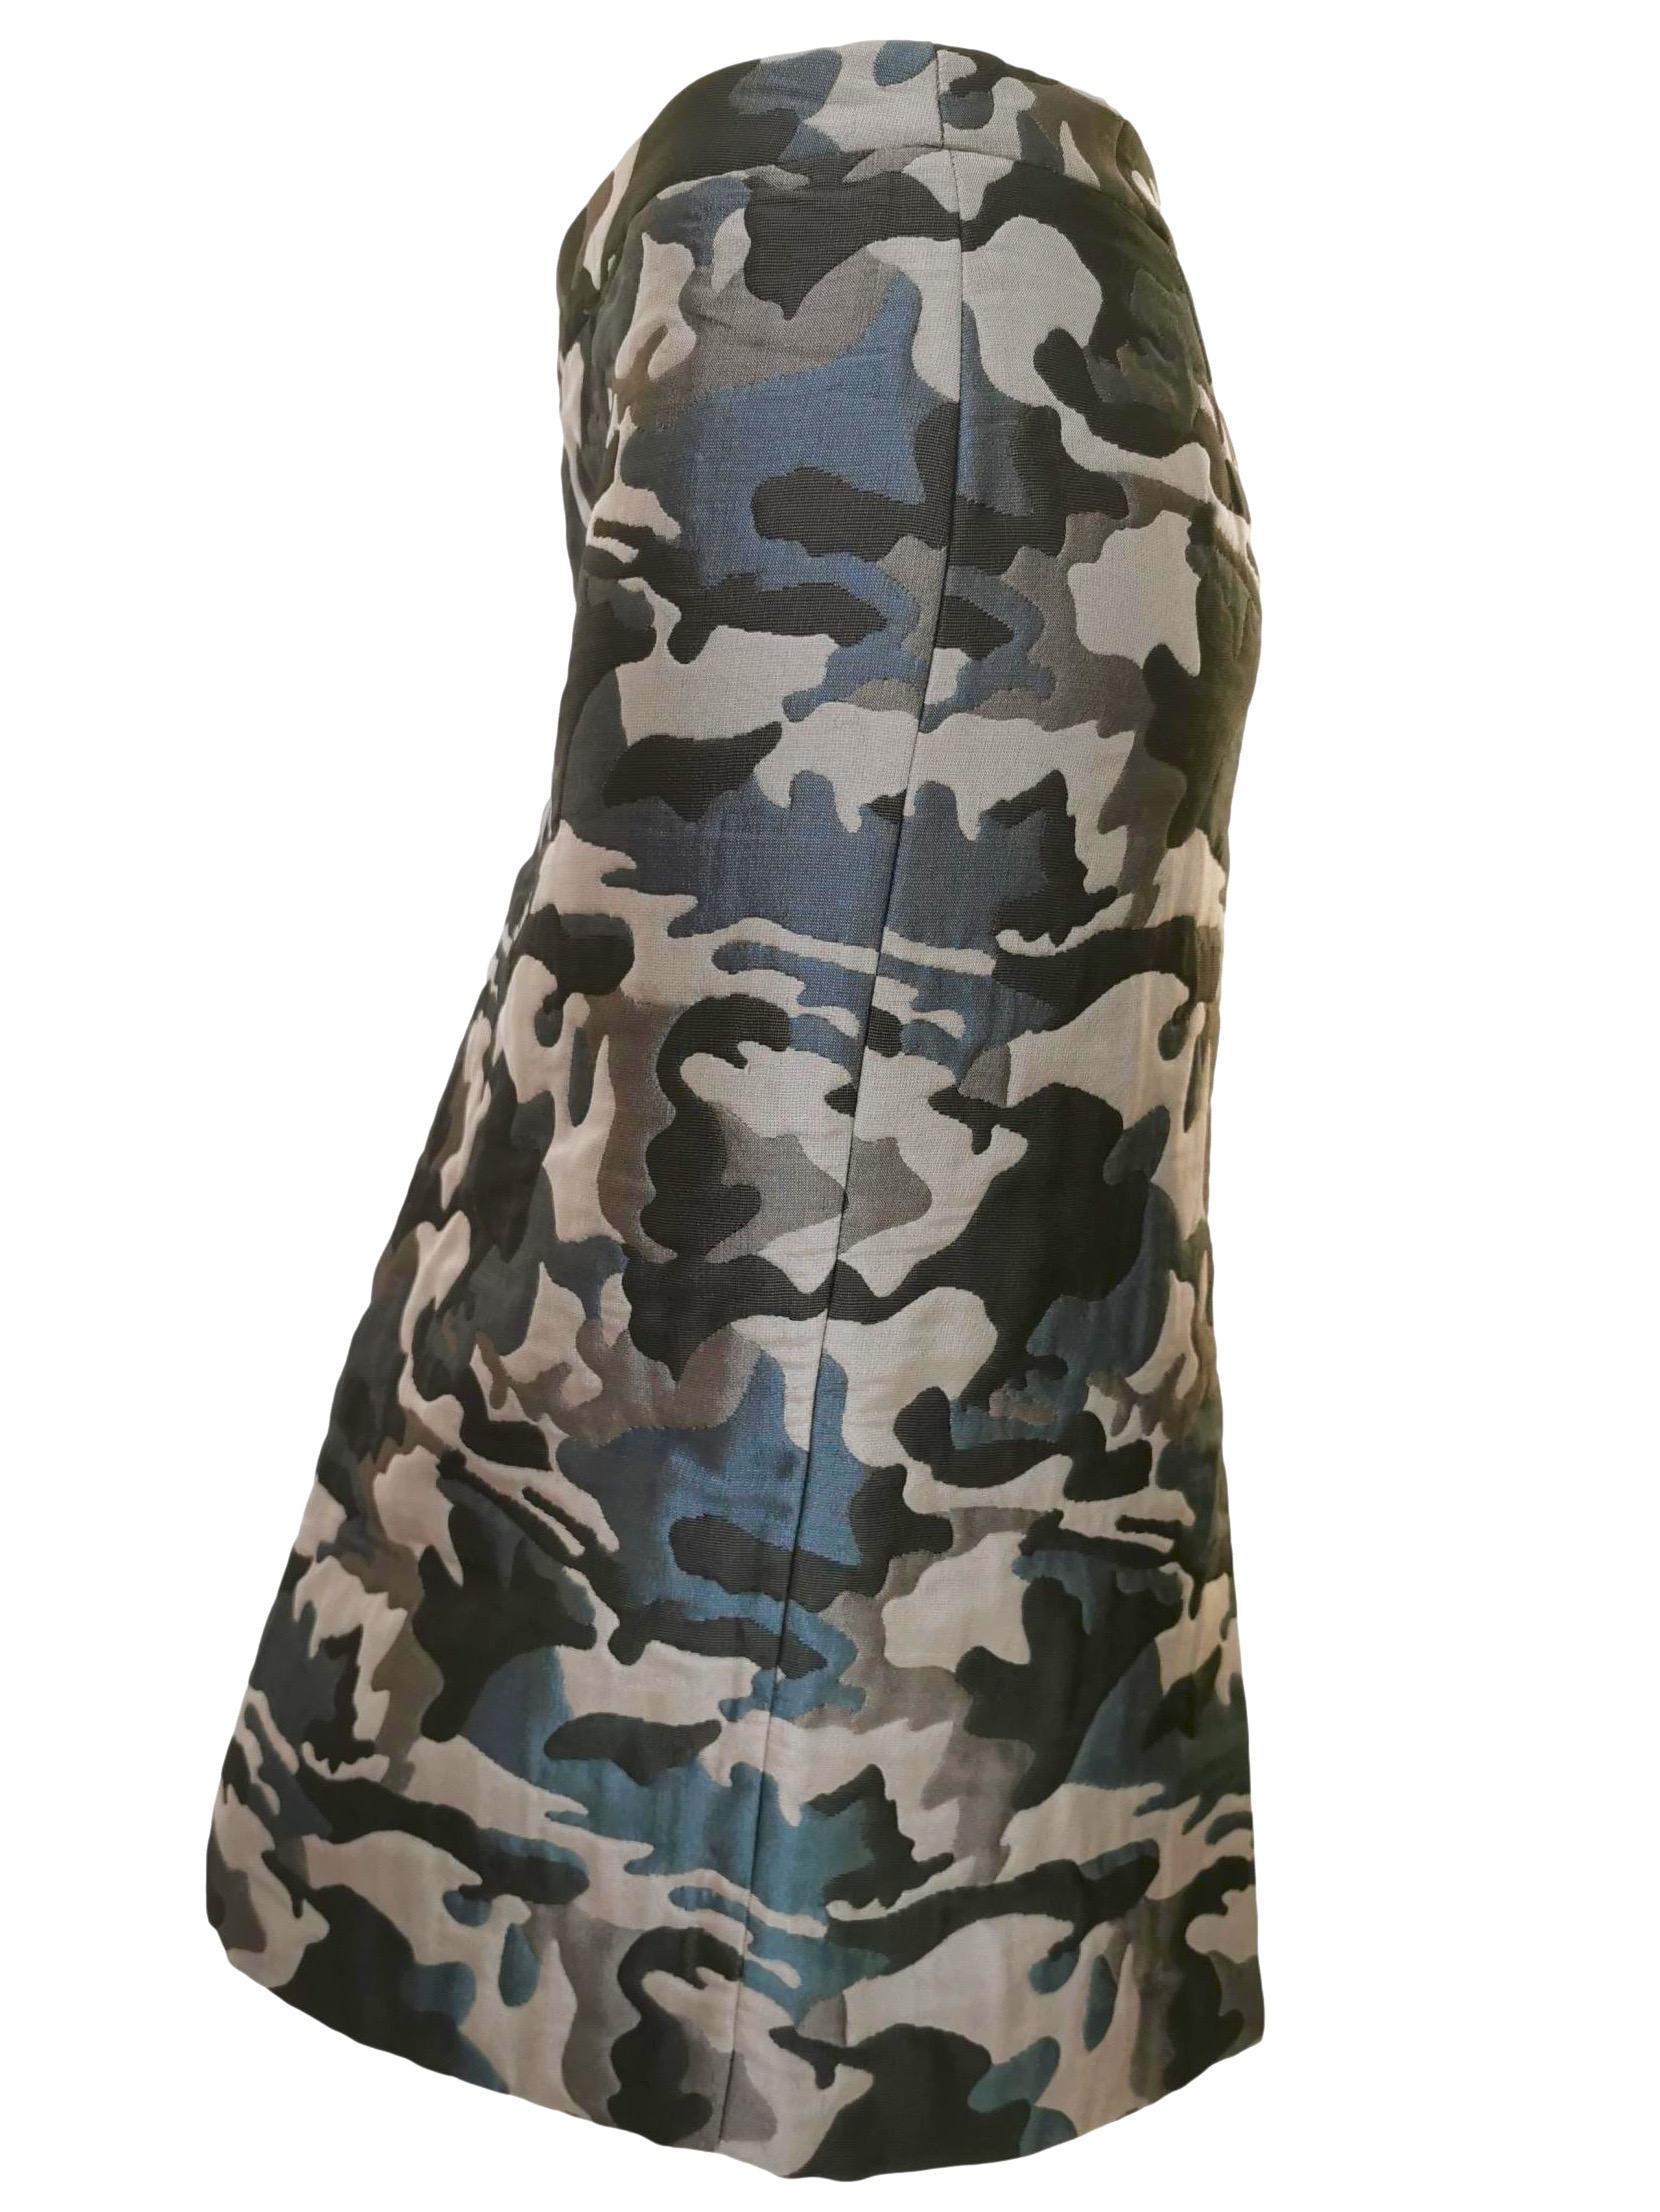 Alexander McQueen 
Early 1990's Camouflage Skirt
Size 40
28 Inch Waist